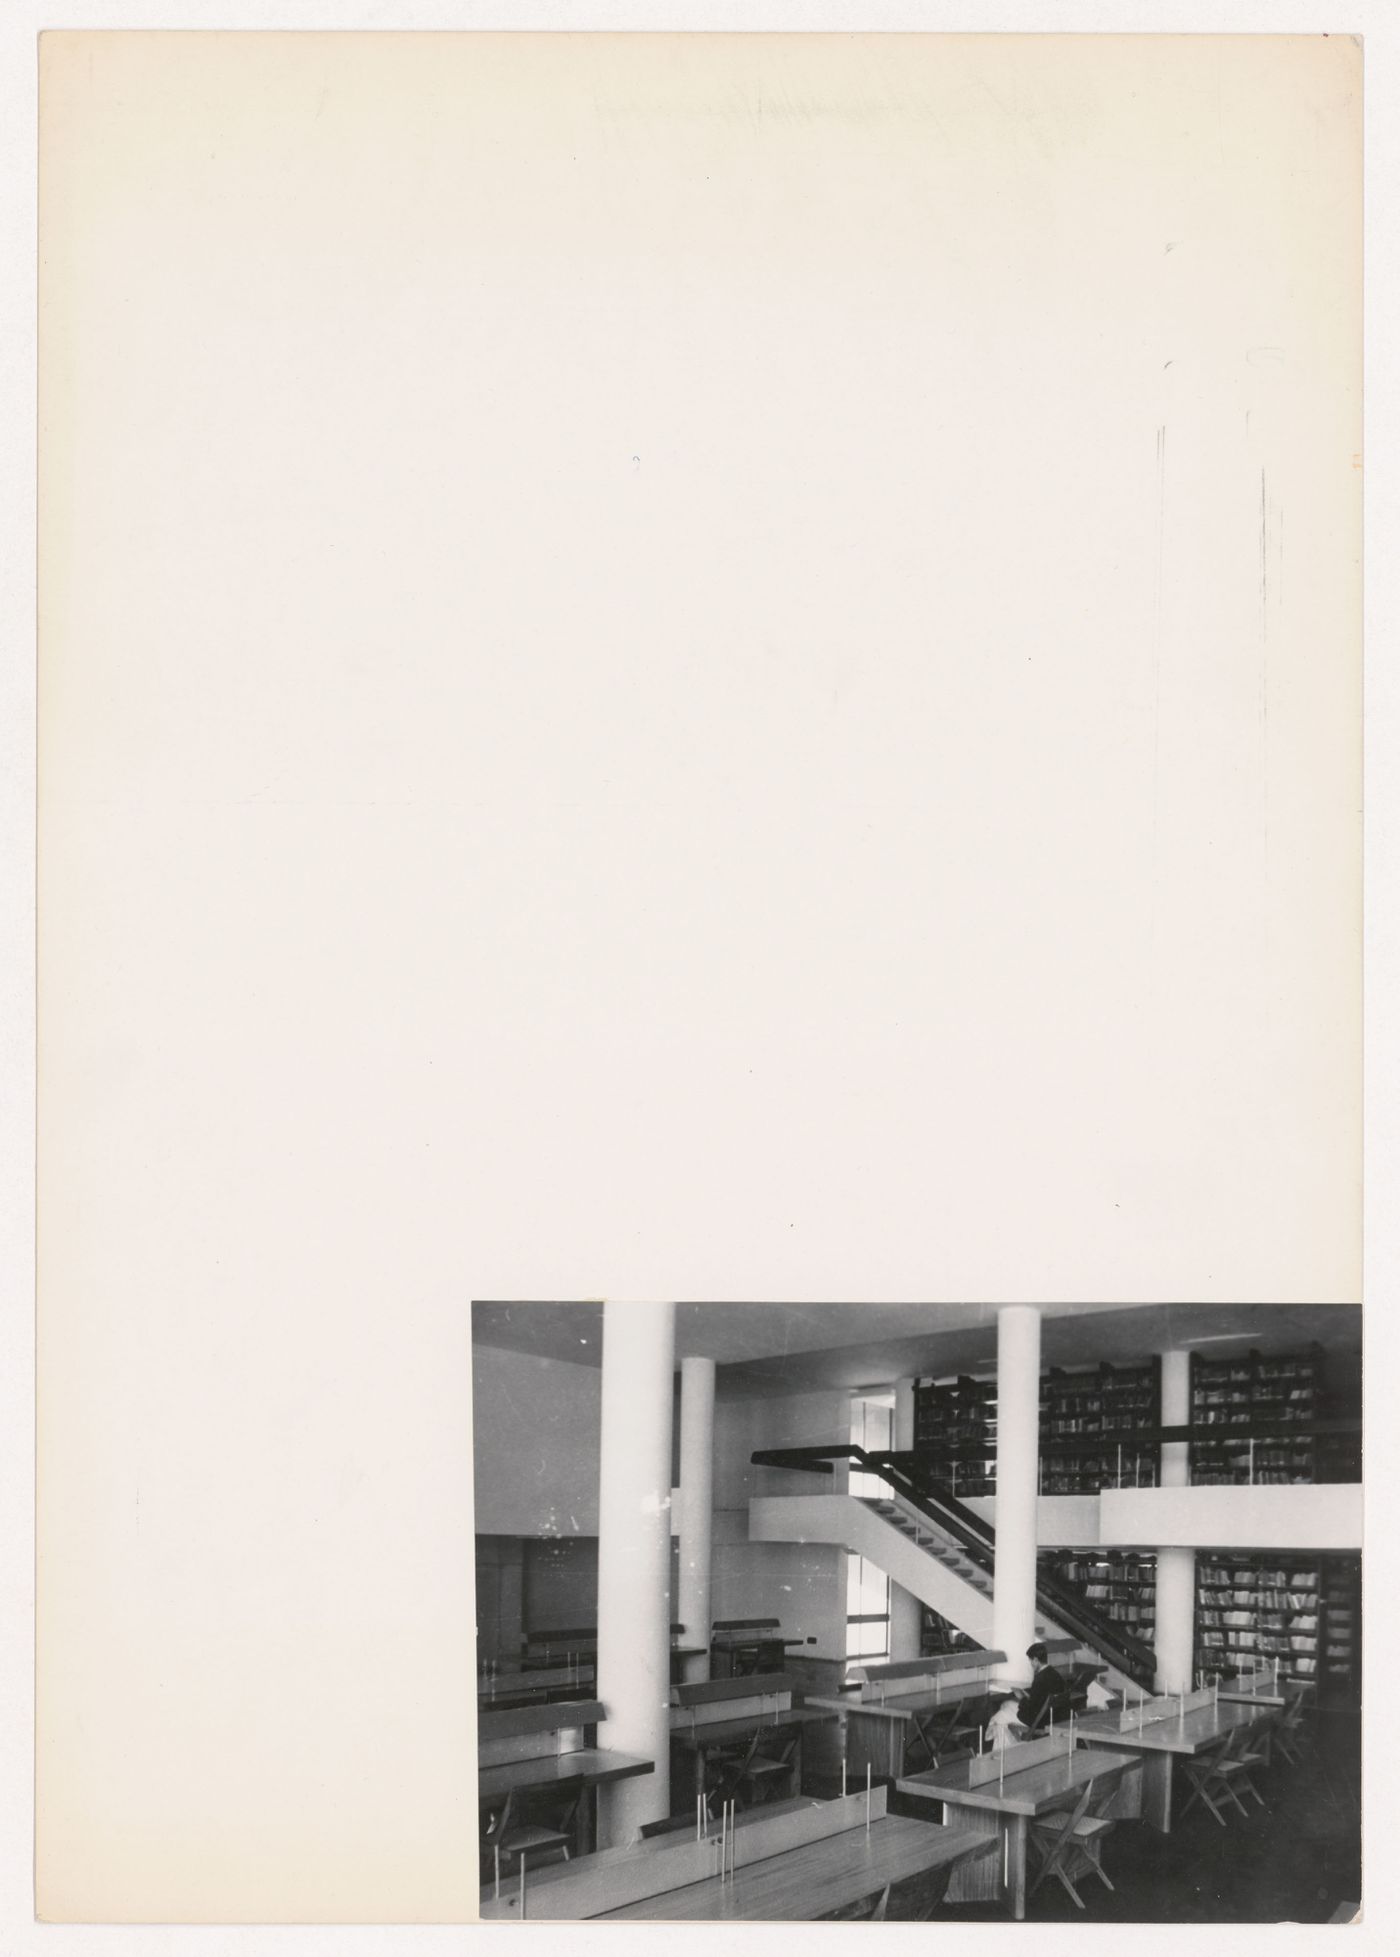 Interior view of the University Library, Panjab University, Sector 14, Chandigarh, India